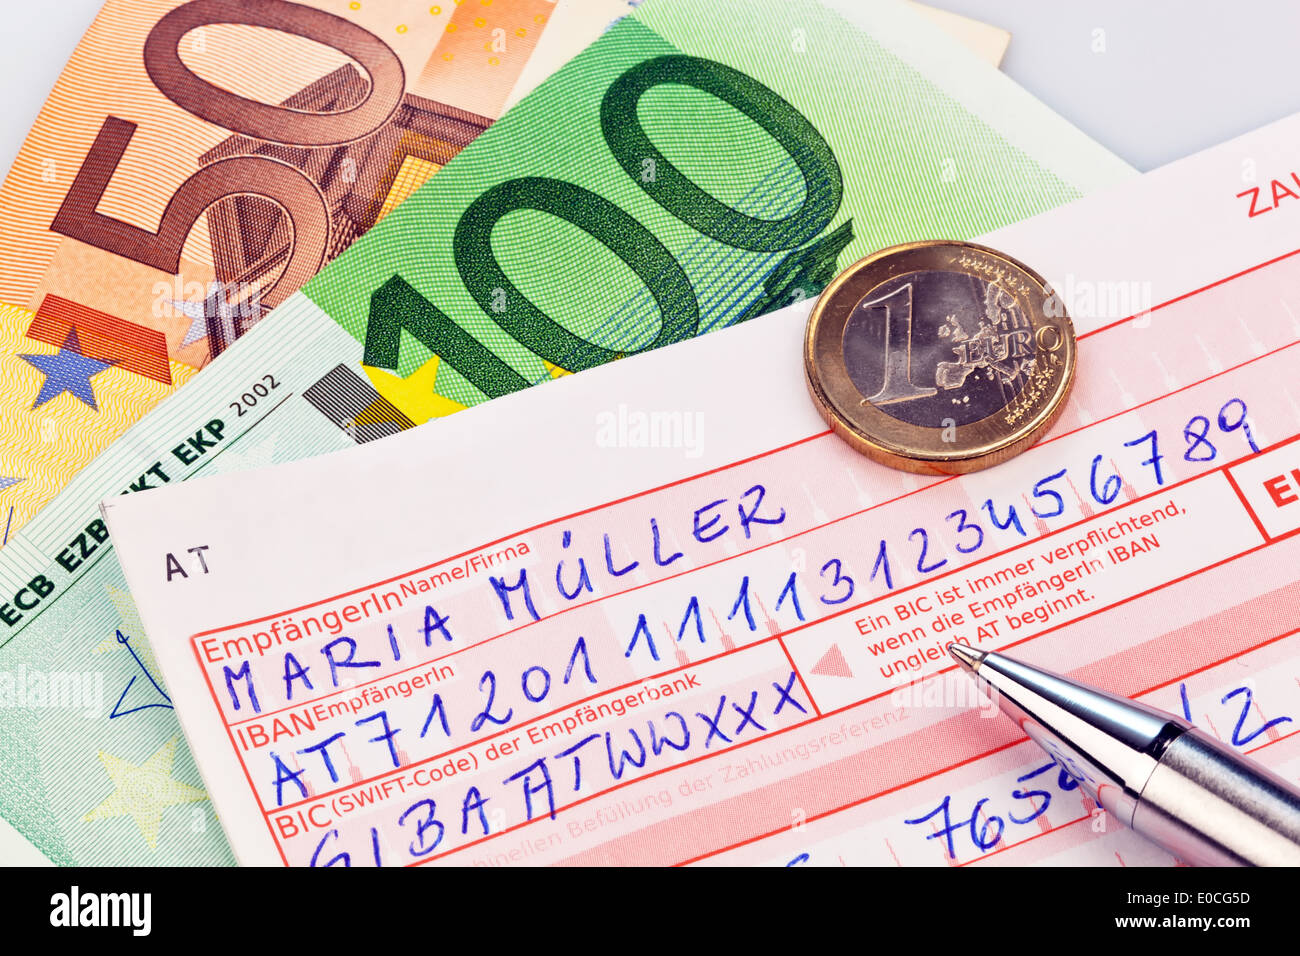 A form for money transfer with number IBAN and code BIC in Germany Stock Photo